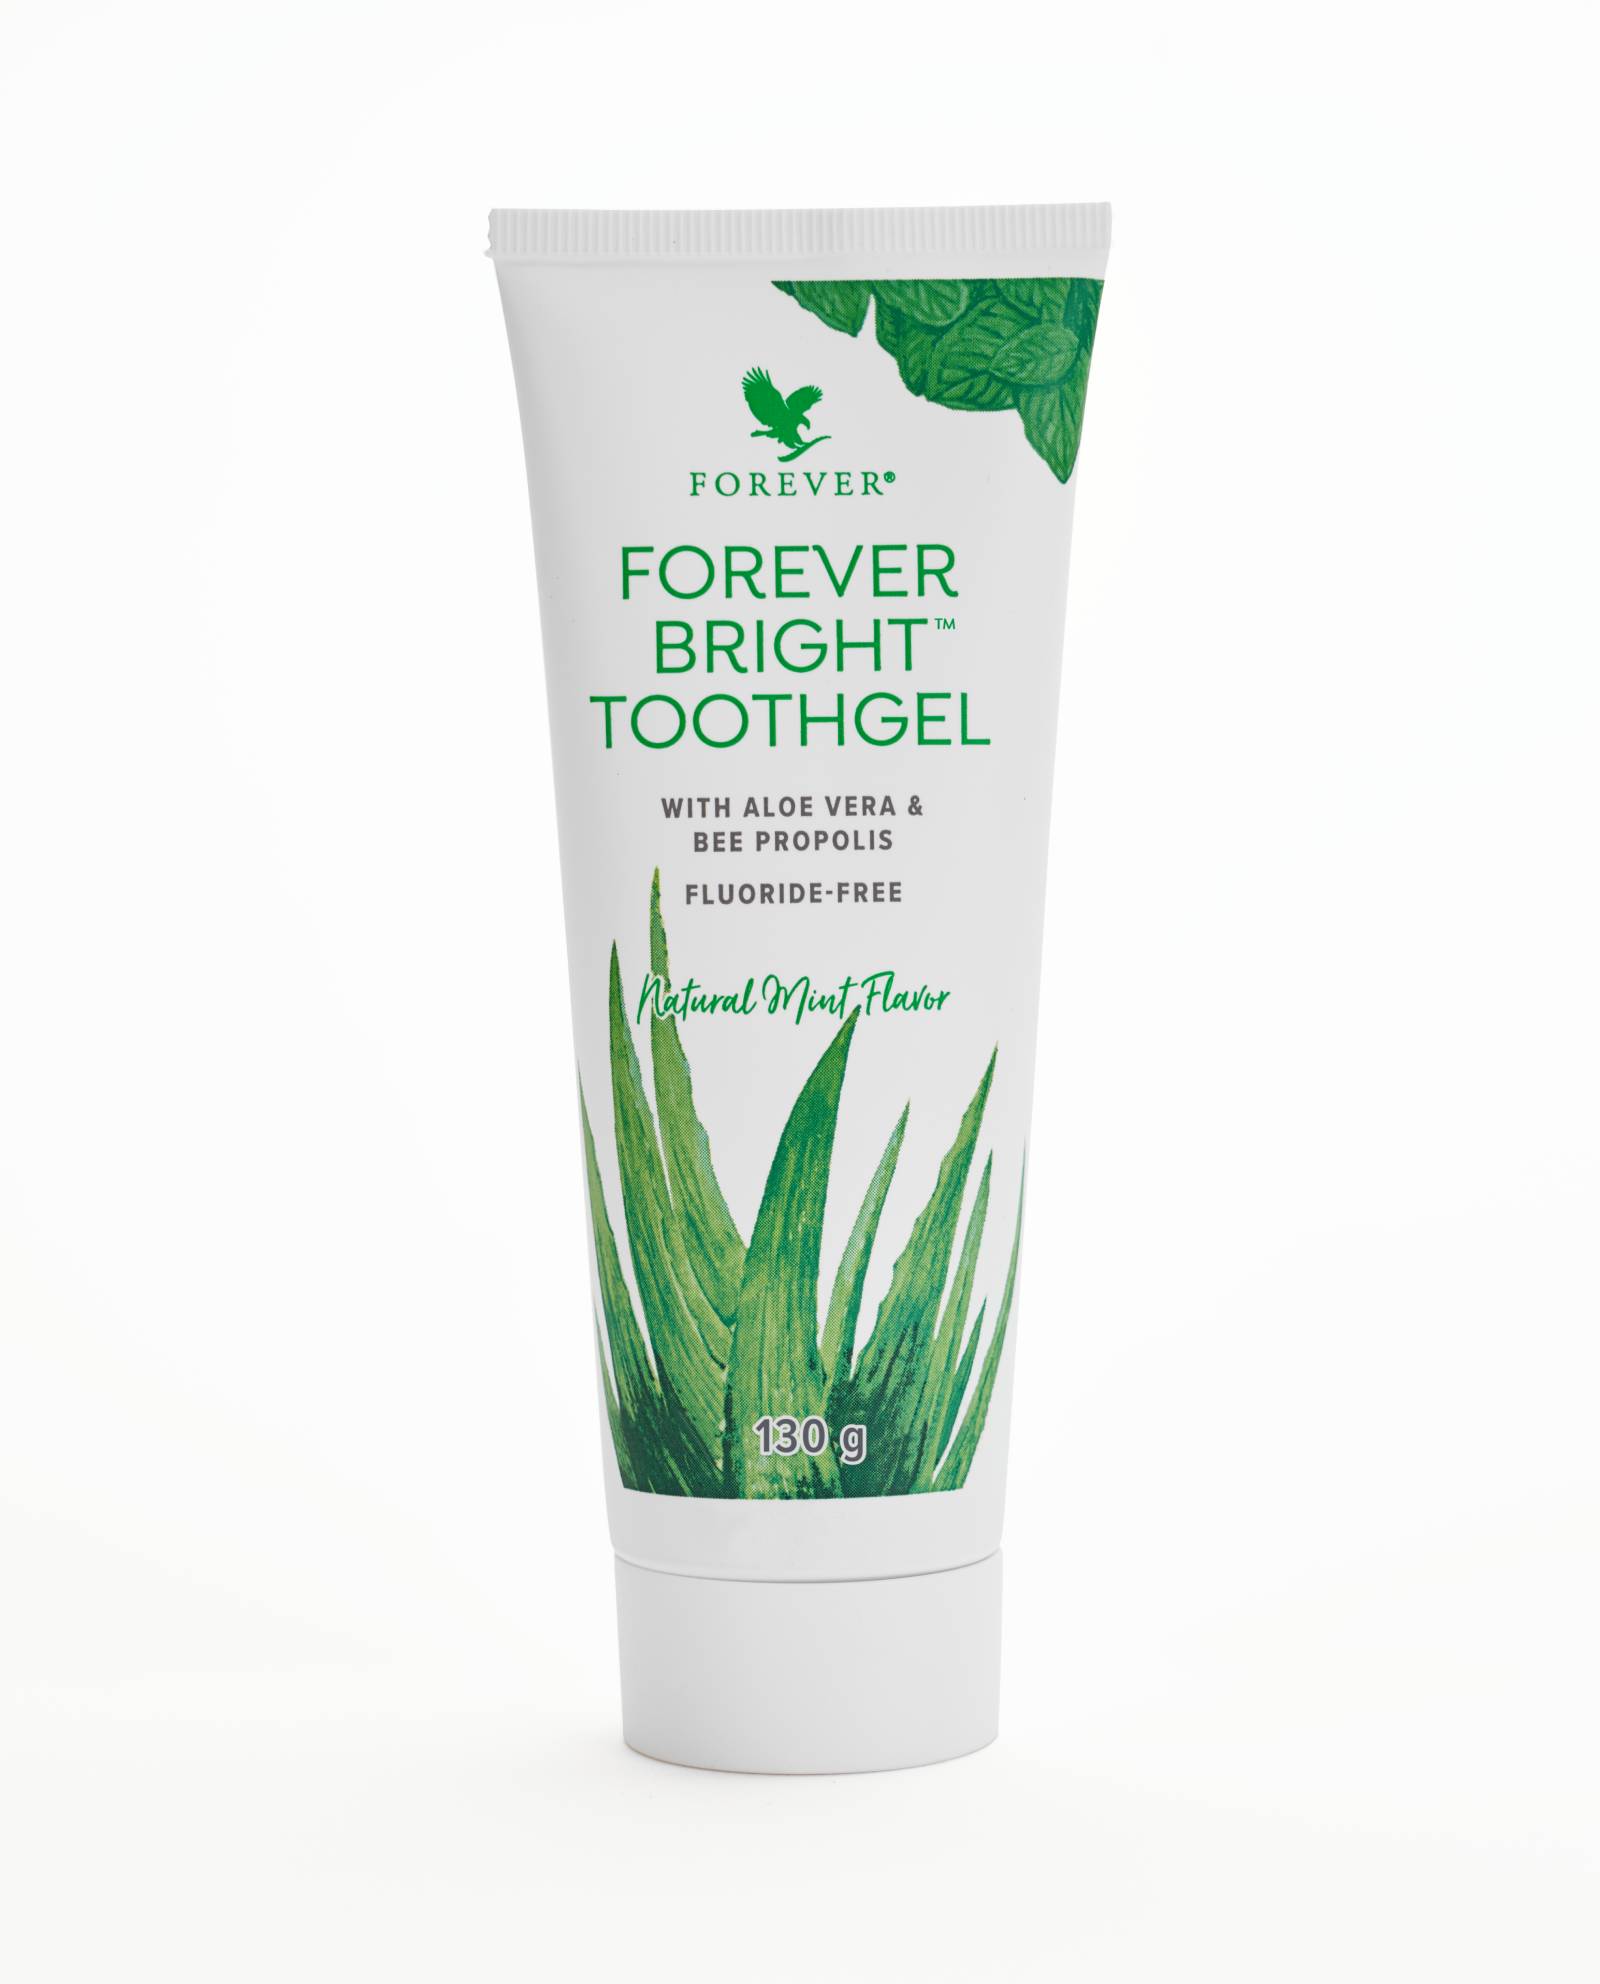 Created for the entire family – as well as your pets – this gentle, non-fluoride formula contains only the highest quality ingredients including aloe vera and bee propolis. Enjoy its natural mint flavour for a taste that will leave your mouth refreshed and your teeth clean. This toothgel is also suitable for vegetarians since it contains no animal by-products.&nbsp;
<span style="font-weight: 700; ">'Forever Bright Toothgel' was awarded the EXCELLENT rating in dermatological tests carried out by Dermatest®.</span>
<div></div>